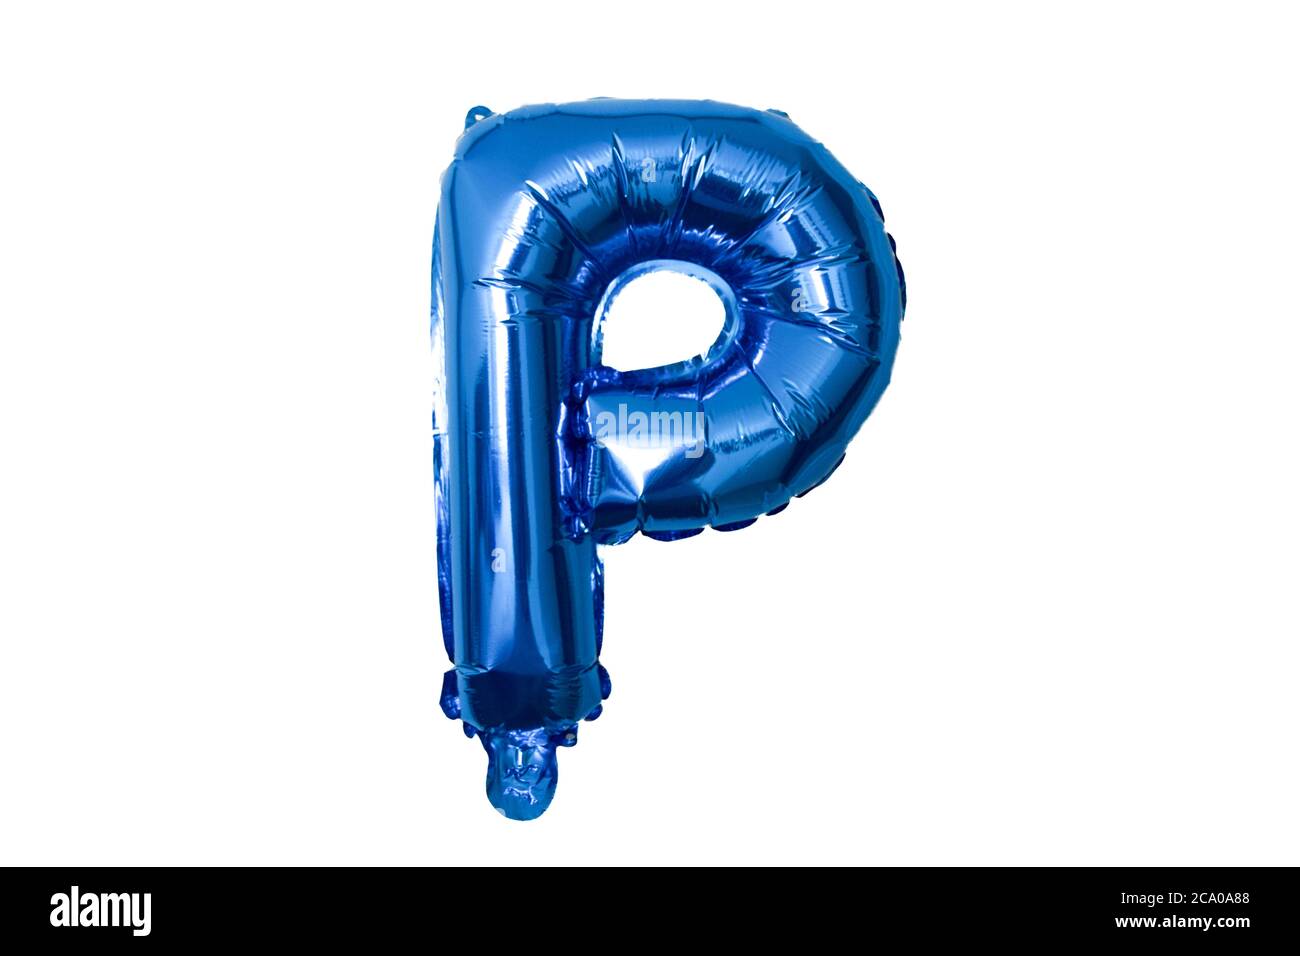 Balloon Letter P in blue Stock Photo